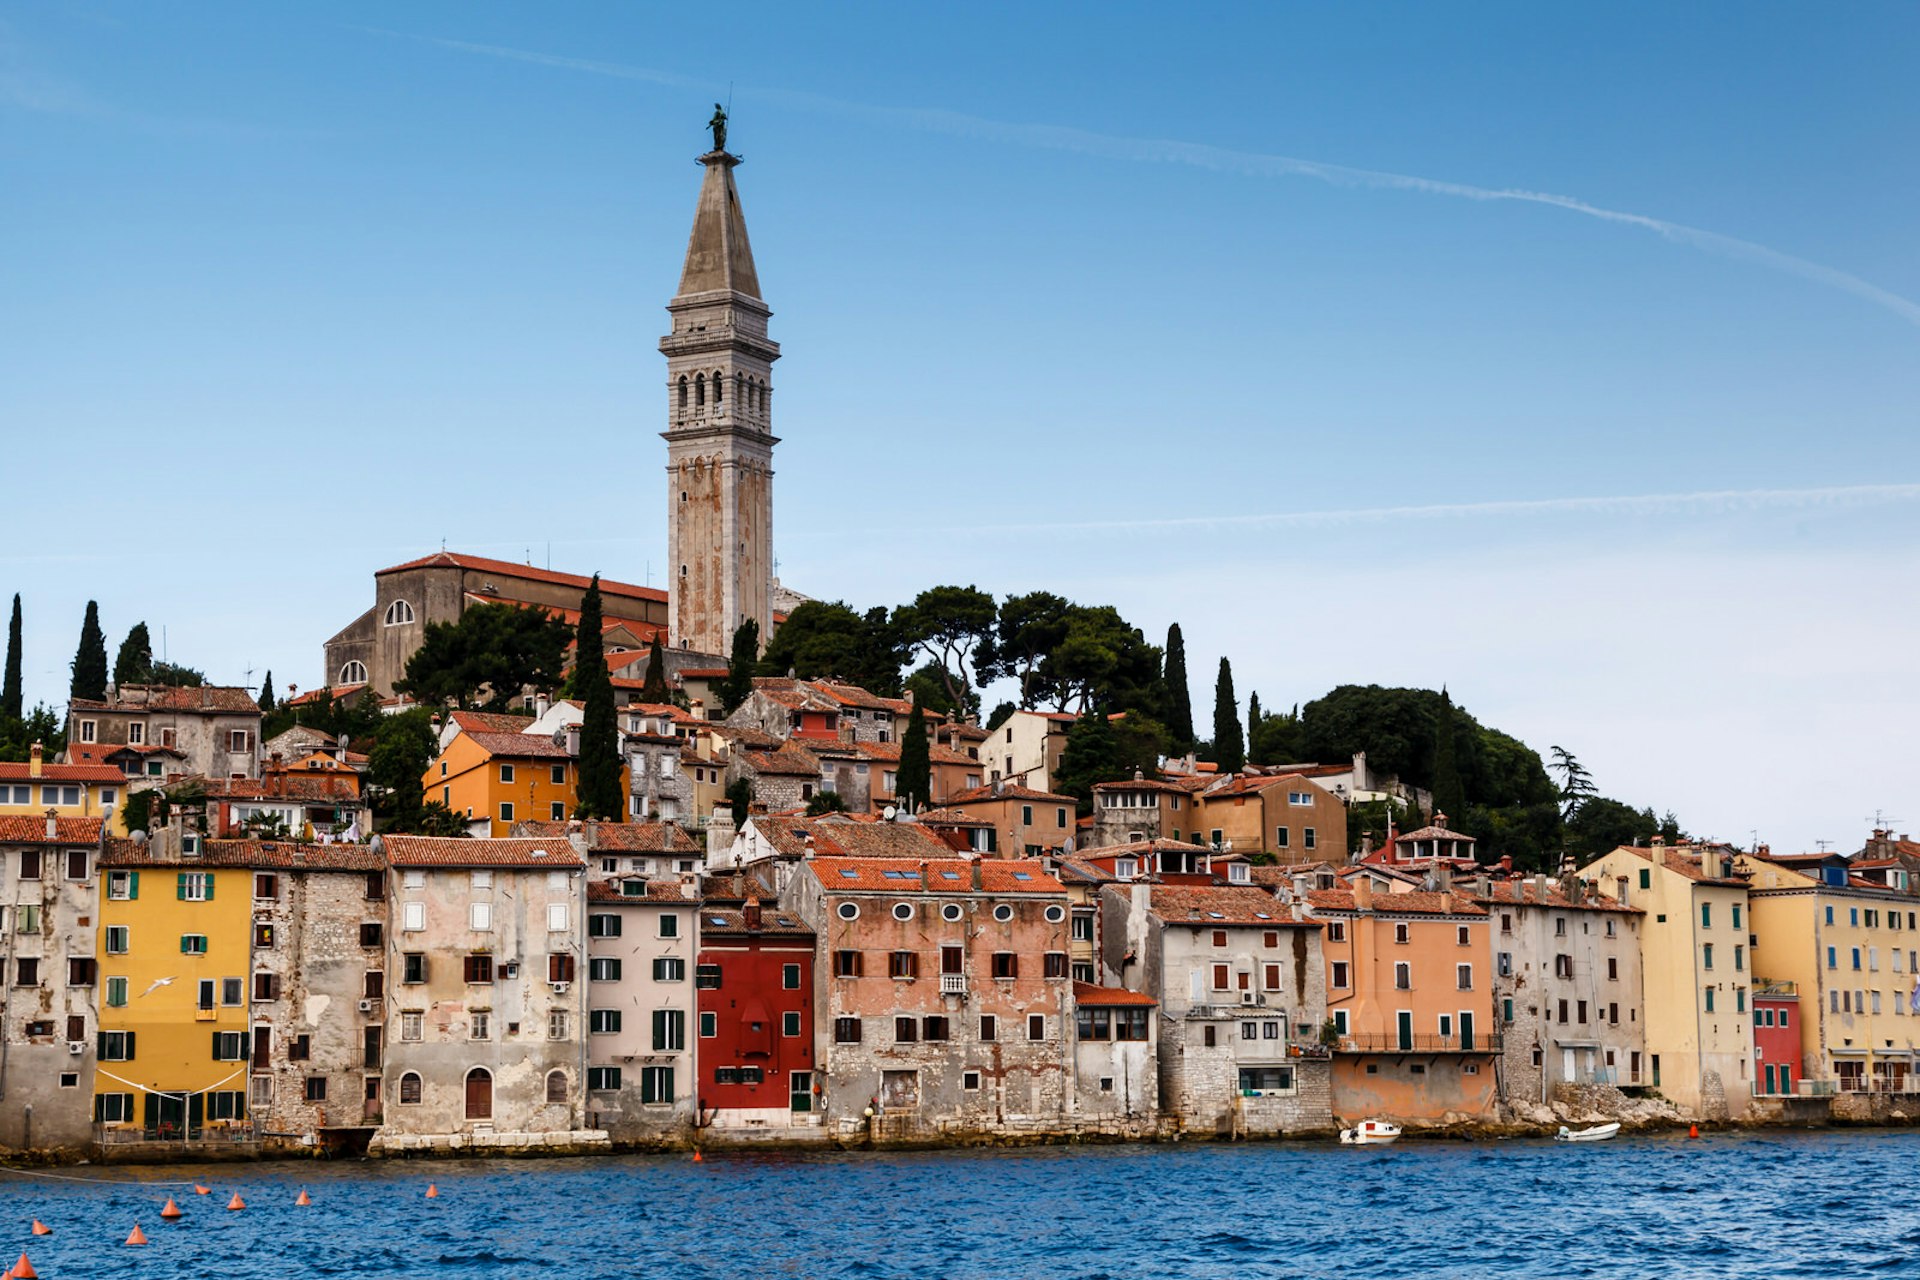 Rovinj's multicoloured buildings sit one above the other, with St Euphemia's Church at the top